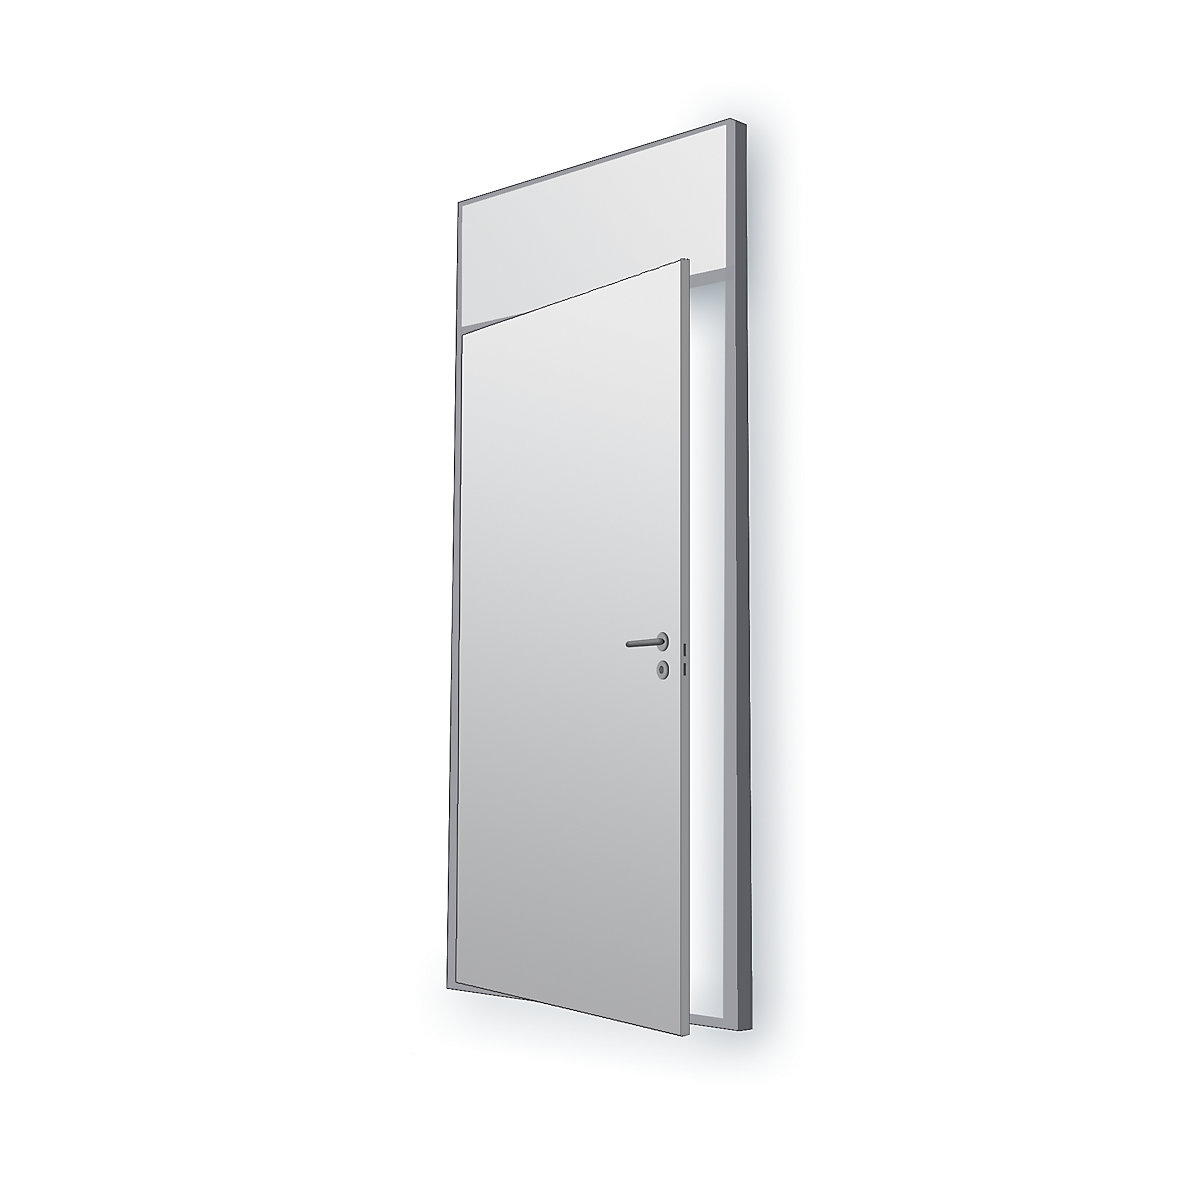 Flexible partition system, wall thickness 82 mm, single door section, HxW 2093 x 936 mm, without window